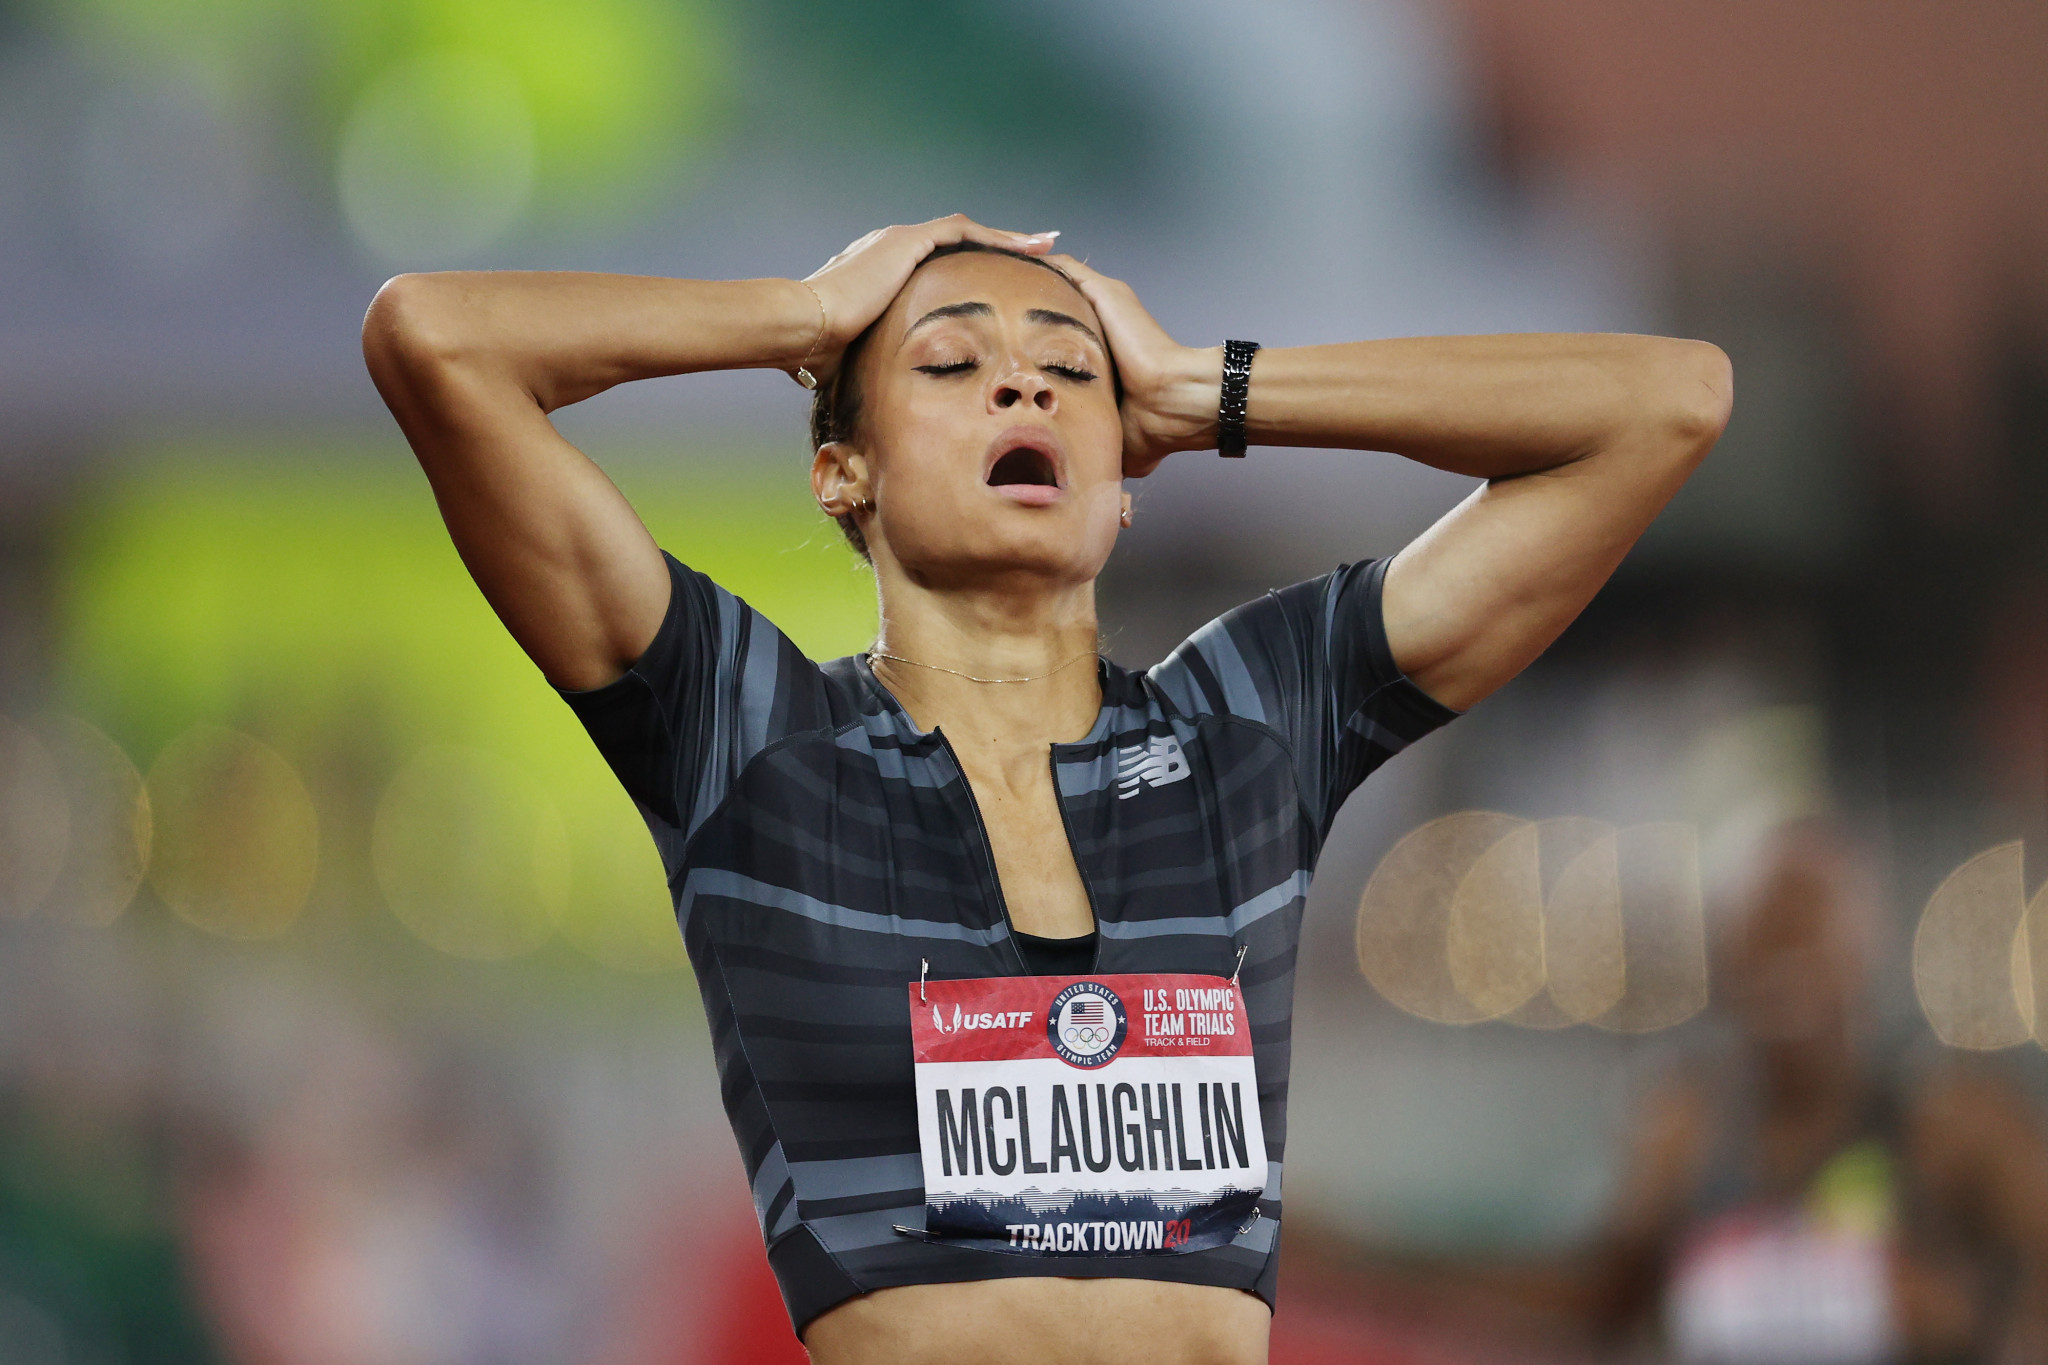 McLaughlin sets women's 400m hurdles world record on final day of US Olympic Trials